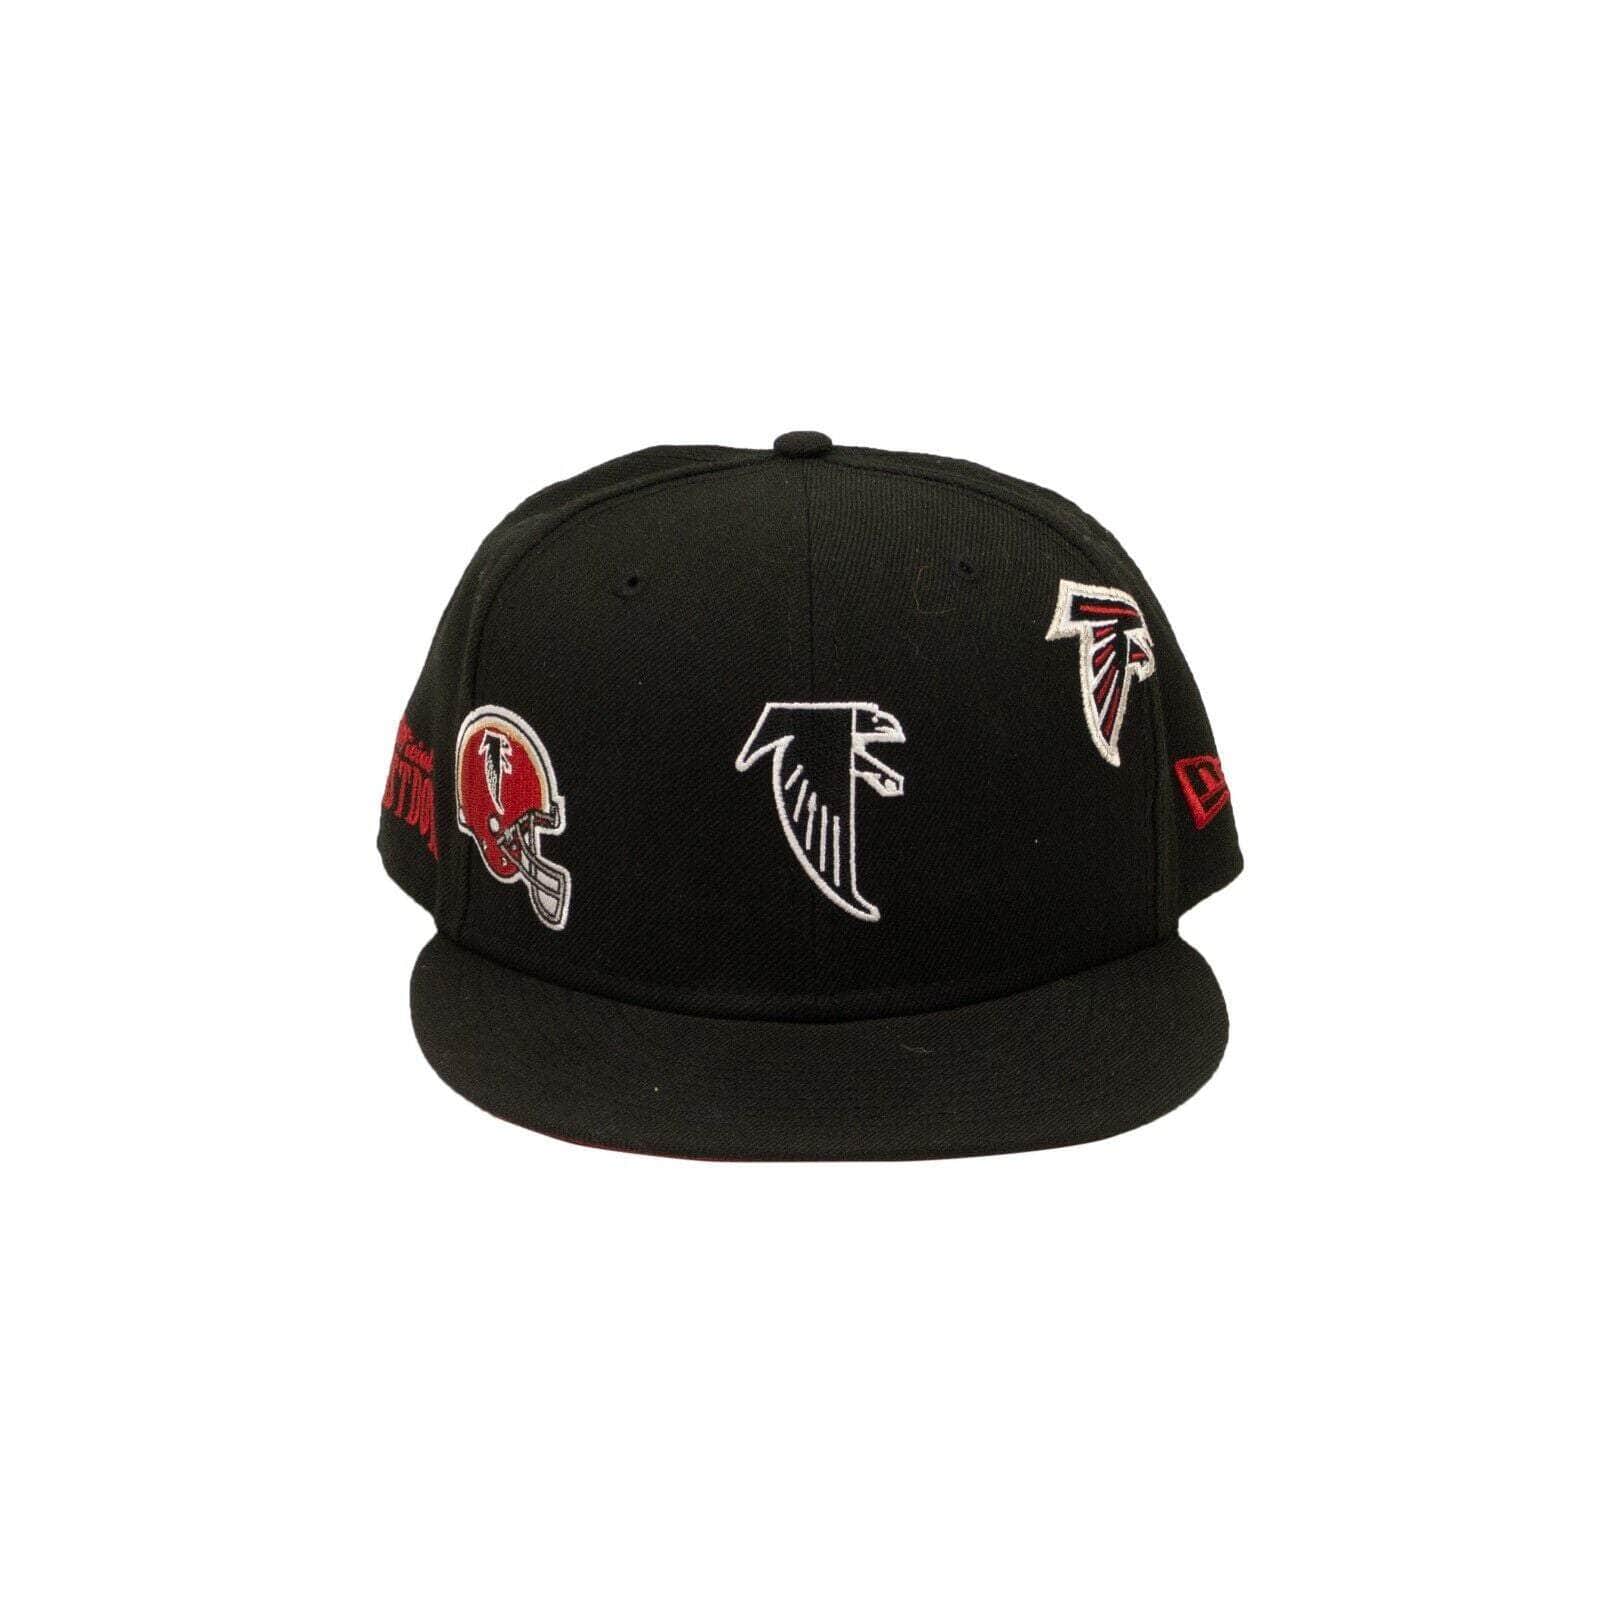 Just Don channelenable-all, chicmi, couponcollection, gender-mens, just-don, main-accessories, mens-shoes, size-7_7-8, under-250 7_7-8 x New Era Atlanta Falcons Black Hat JSD-XACC-0005/7_7-8 JSD-XACC-0005/7_7-8